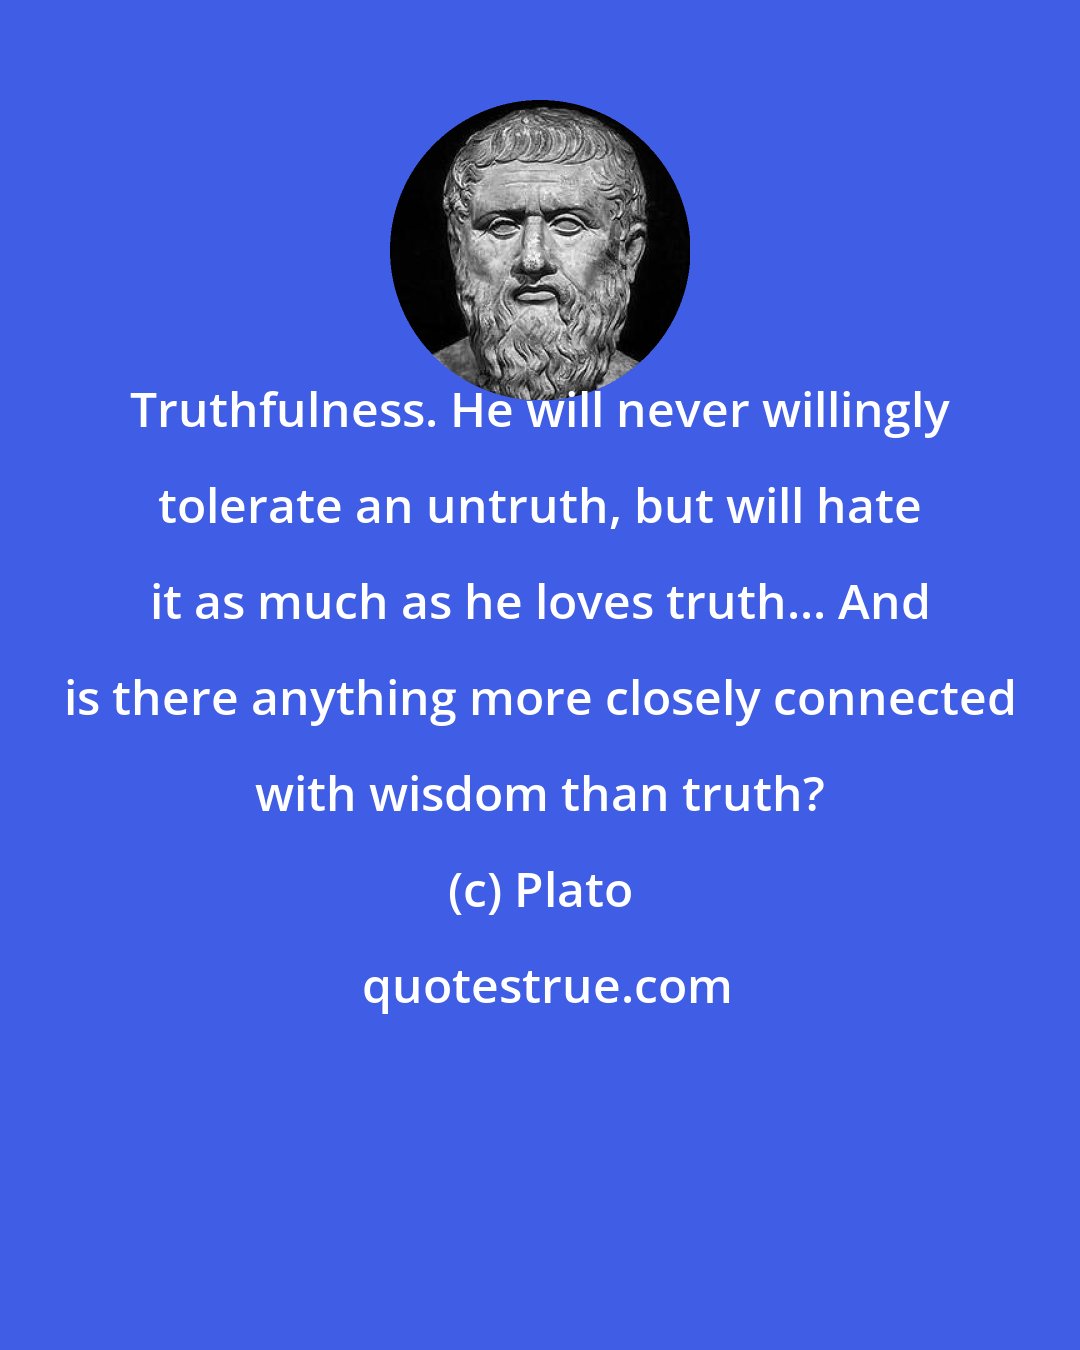 Plato: Truthfulness. He will never willingly tolerate an untruth, but will hate it as much as he loves truth... And is there anything more closely connected with wisdom than truth?